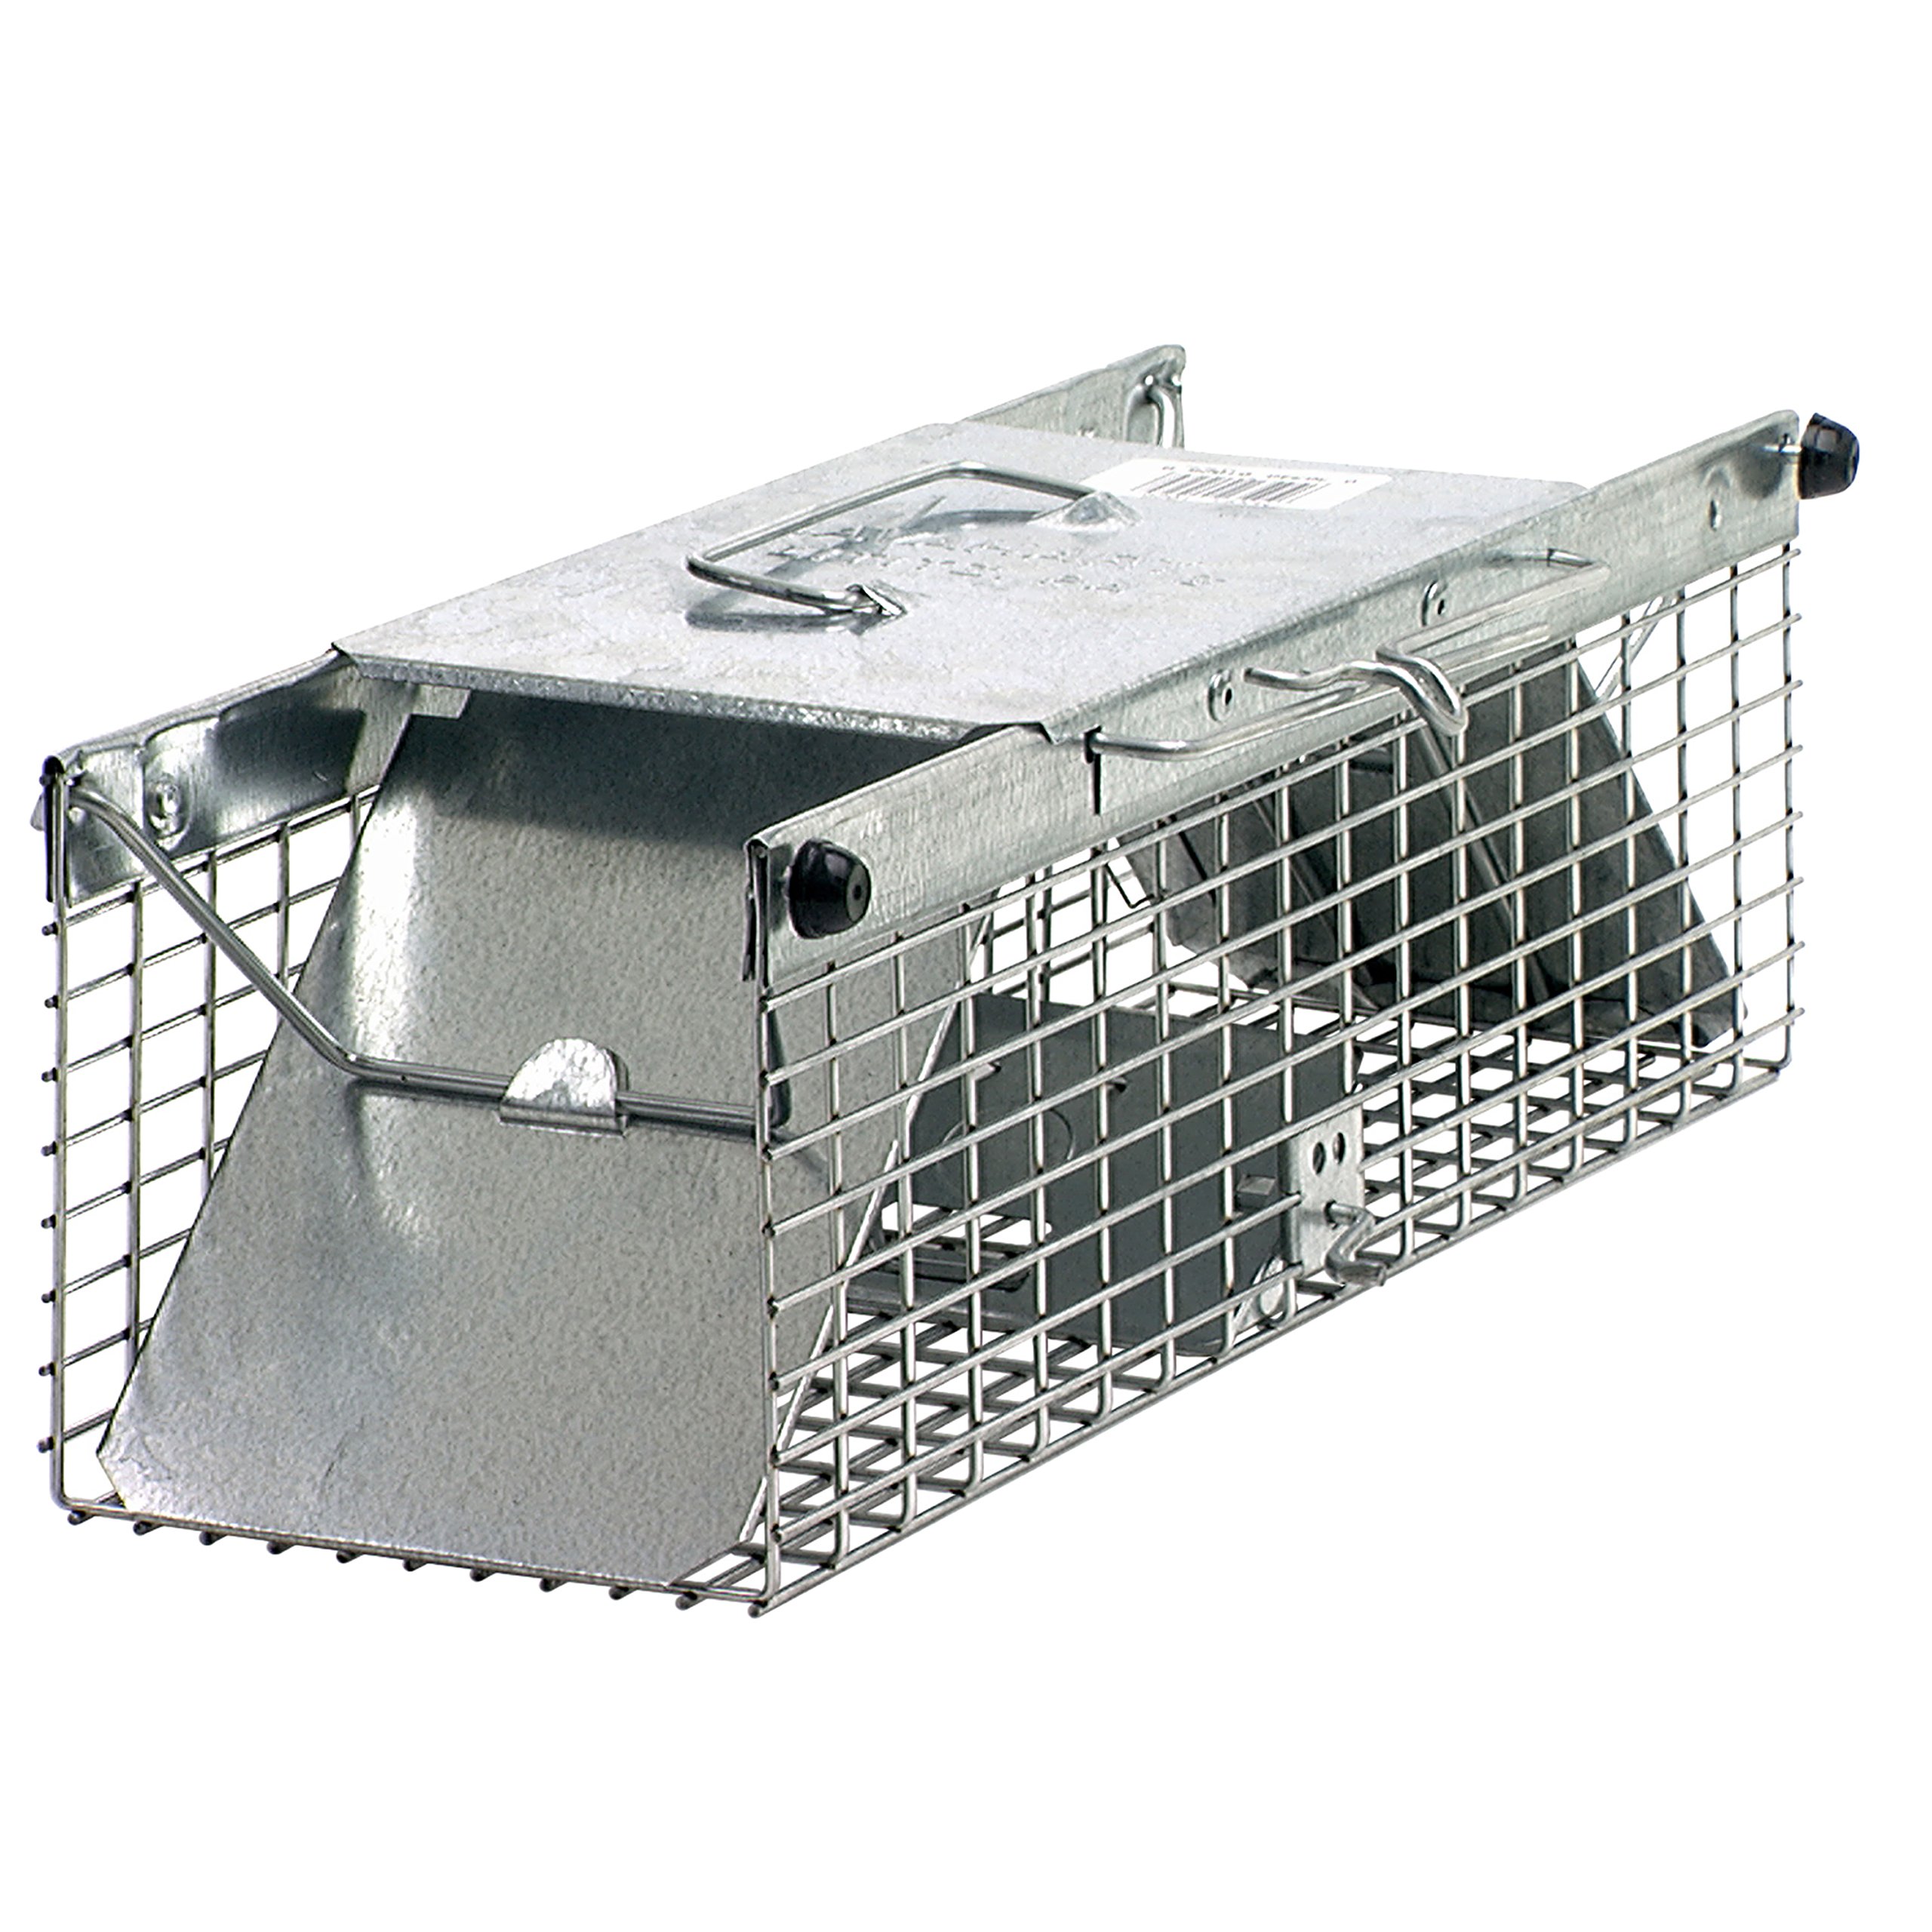 Havahart 1025 Small 2-Door Humane Catch and Release Live Animal Trap for Squirrels, Chipmunks, Rats, Weasels, and Small Animals